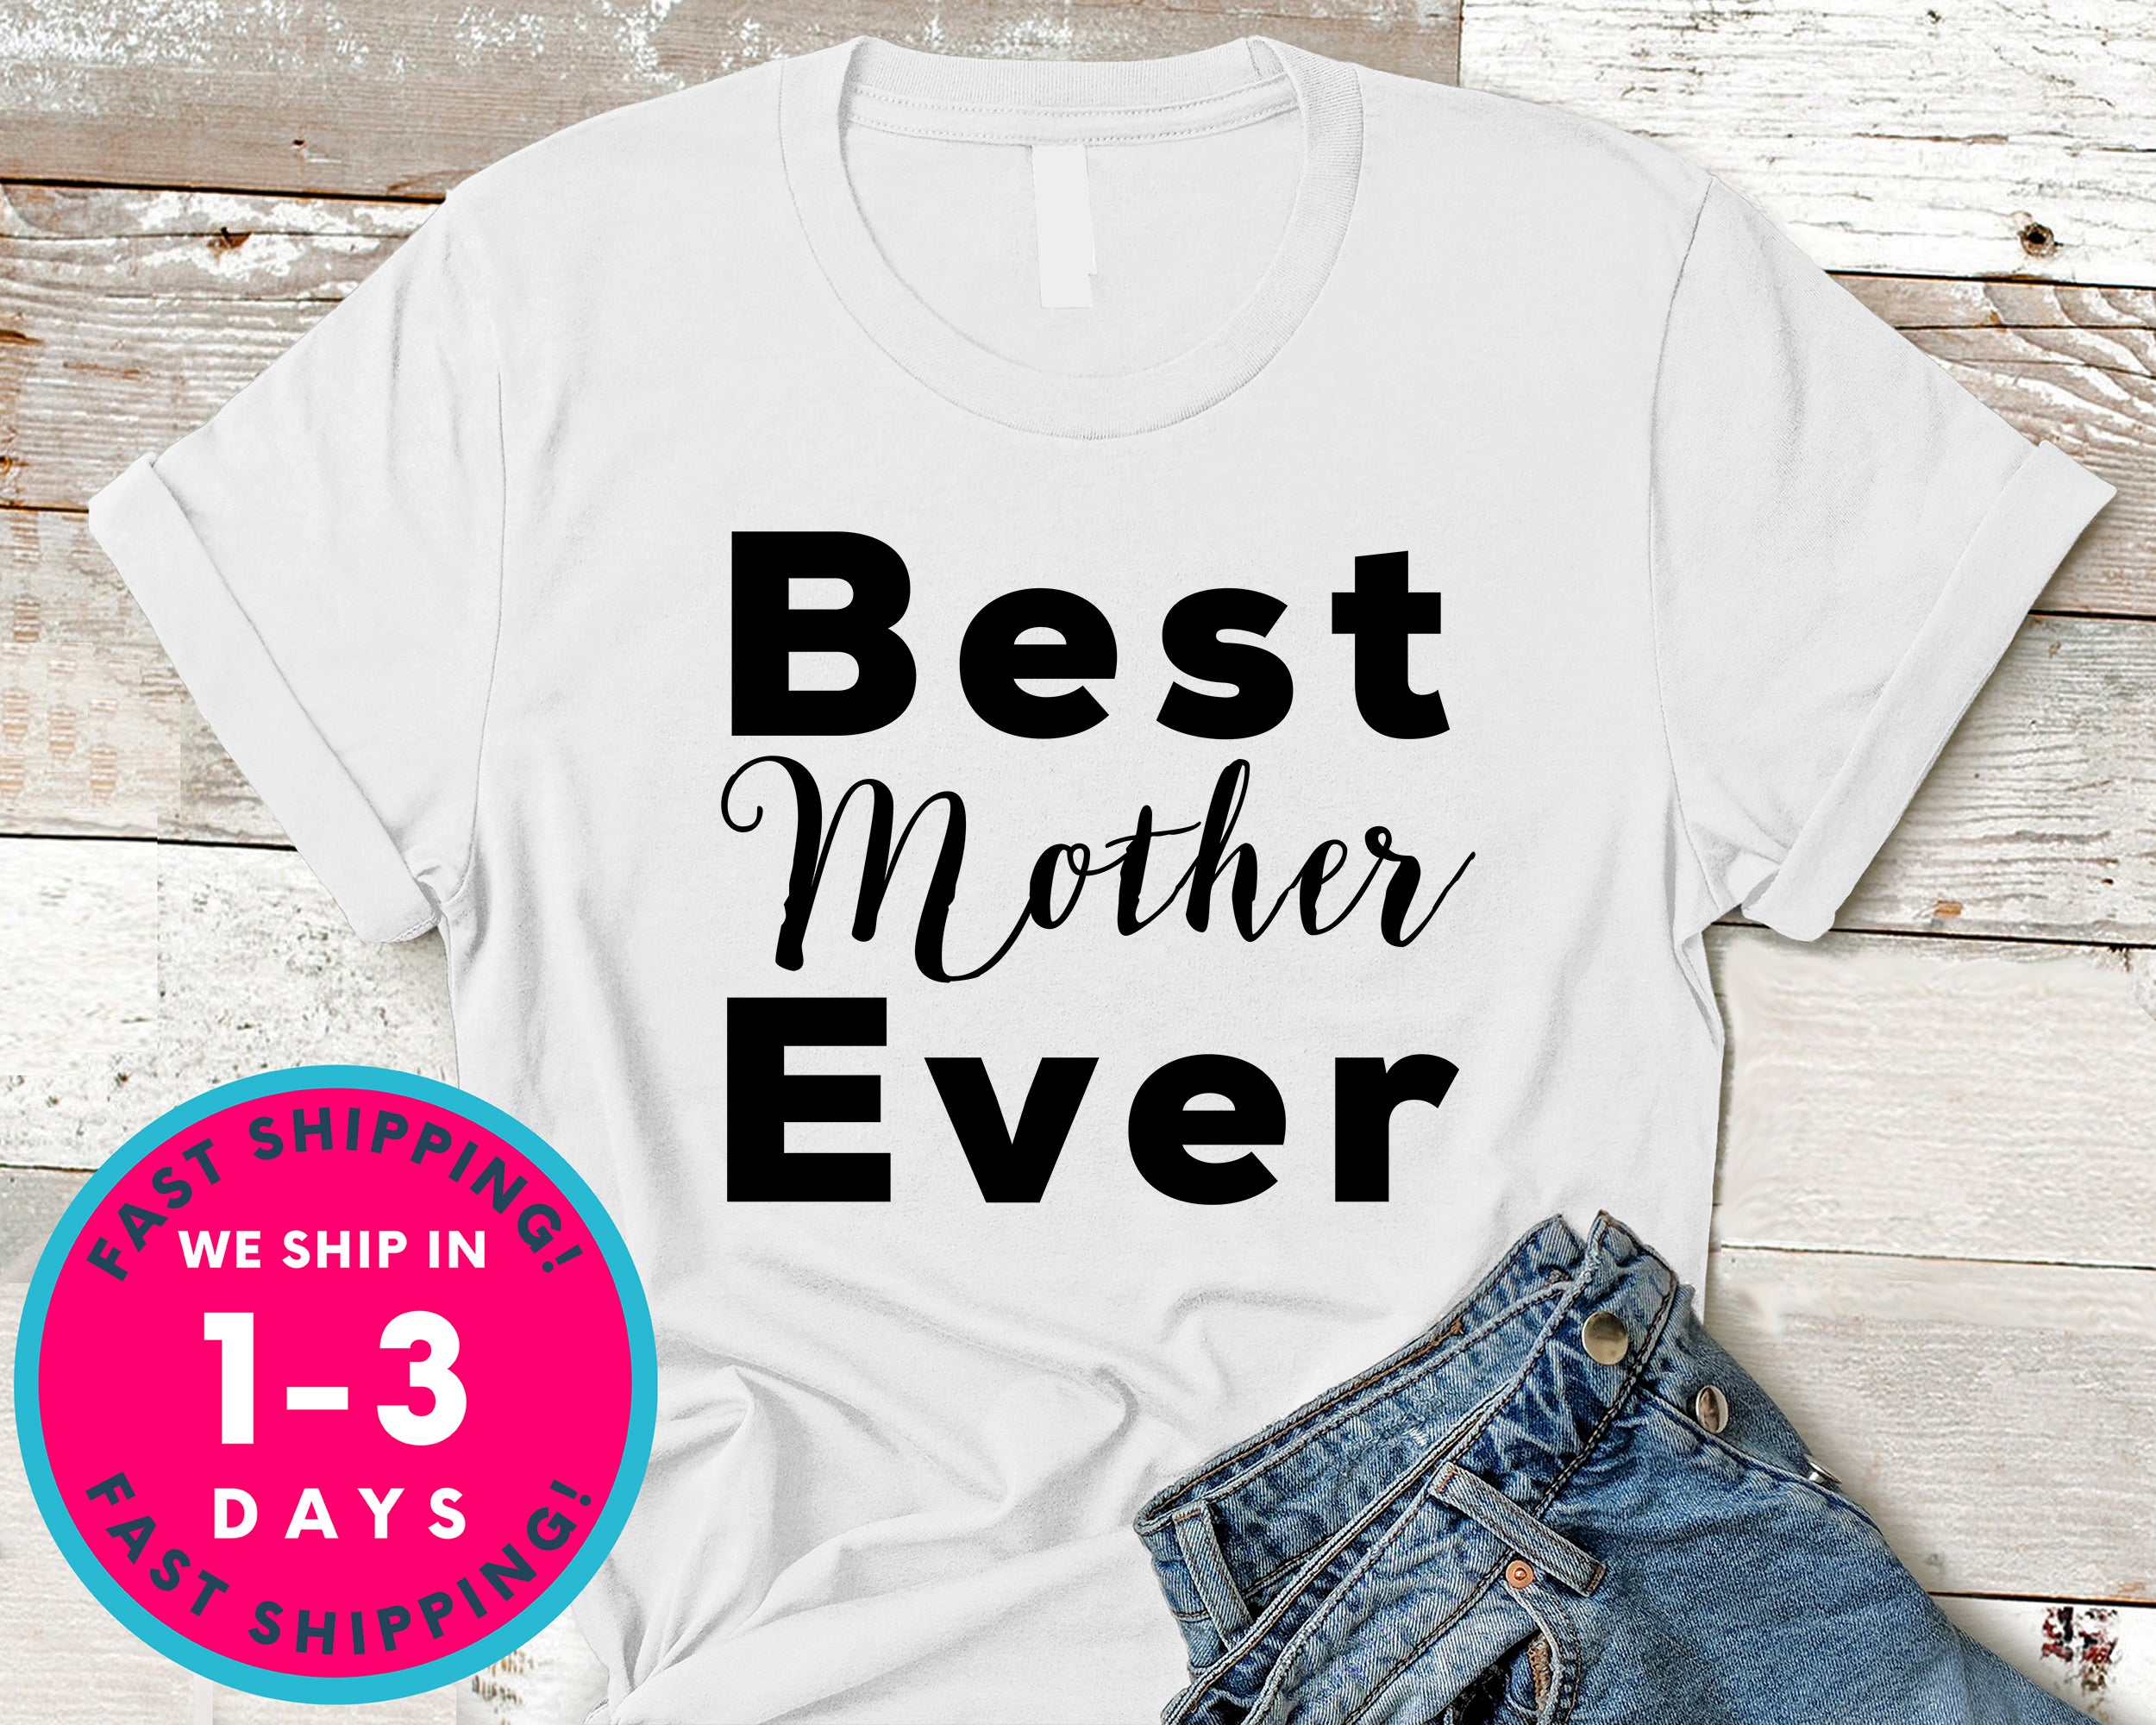 Best Mother Ever T-Shirt - Mother's Day Mom Shirt